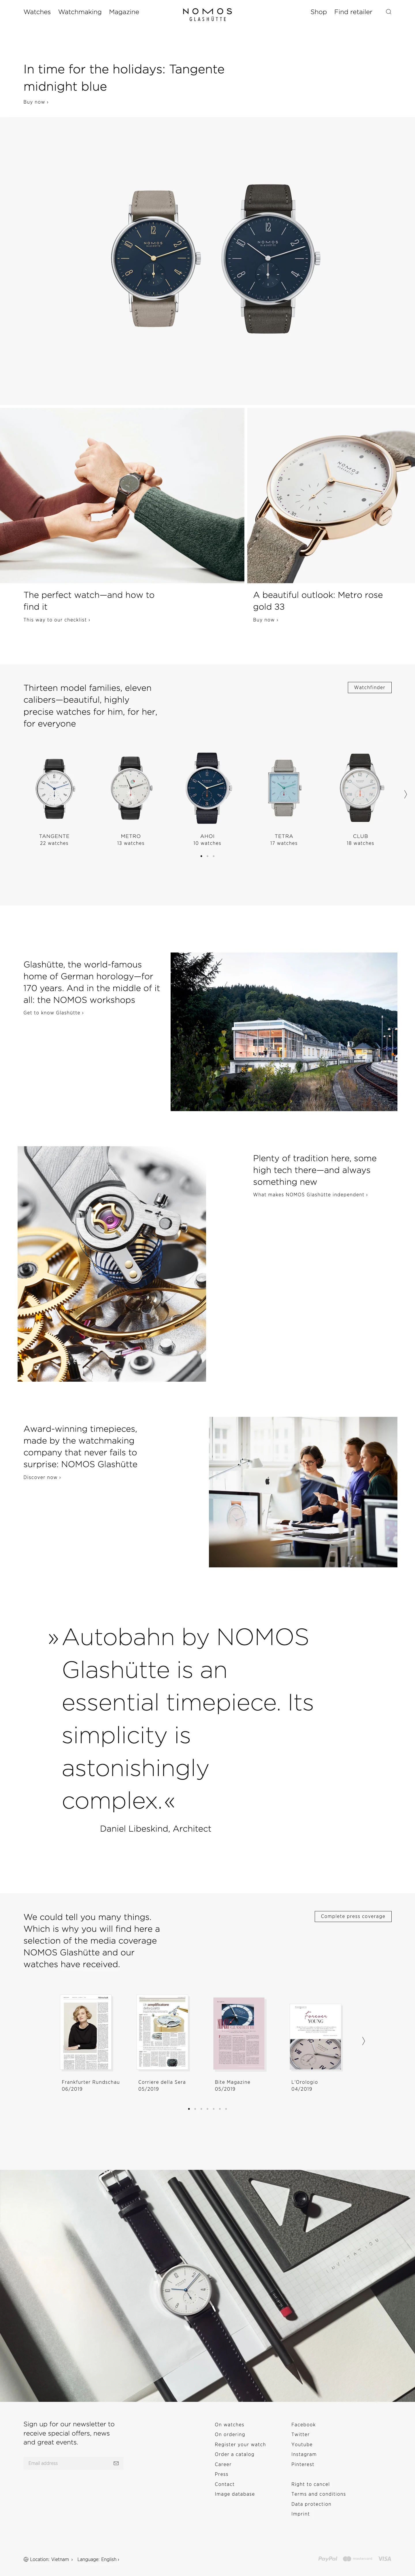 NOMOS Glashütte Landing Page Example: Fine mechanical watches, built by hand to last a lifetime, designed to look good any time.